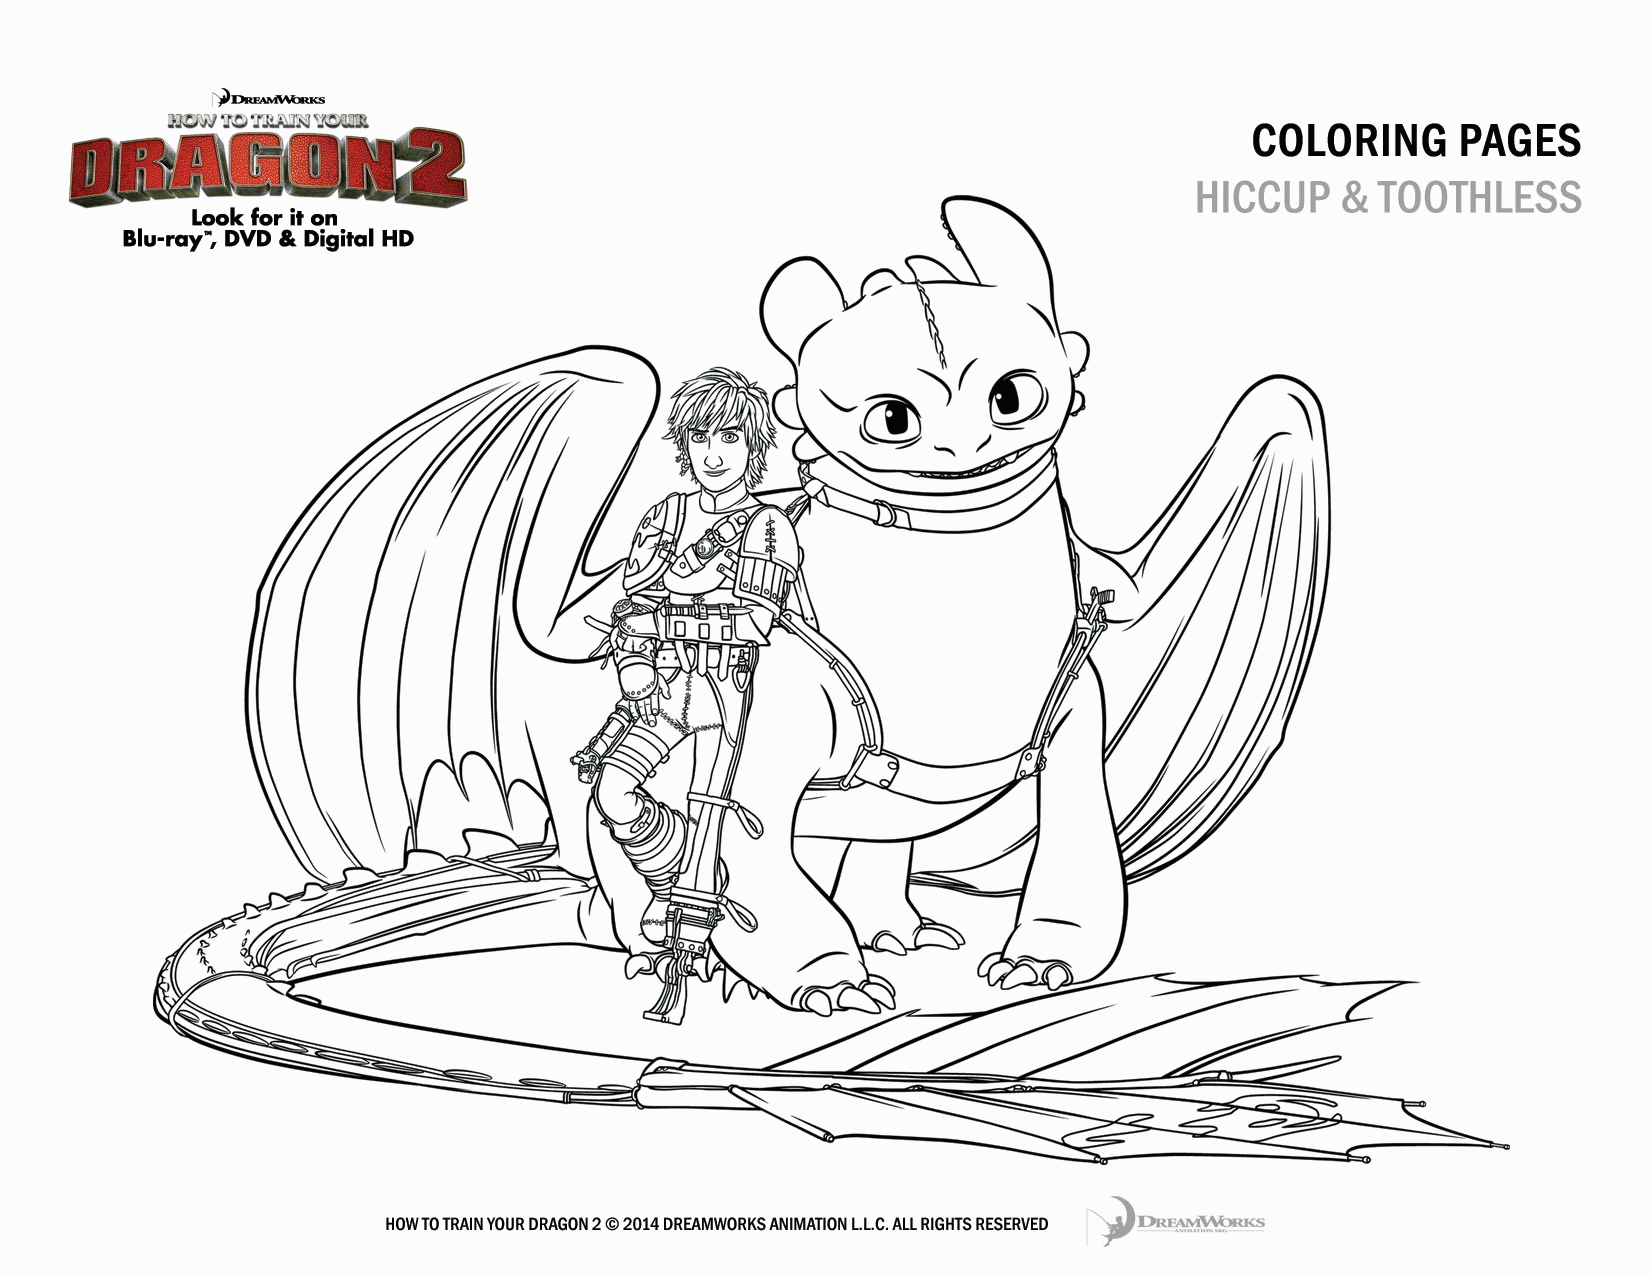 Download Toothless Coloring Page - Coloring Home